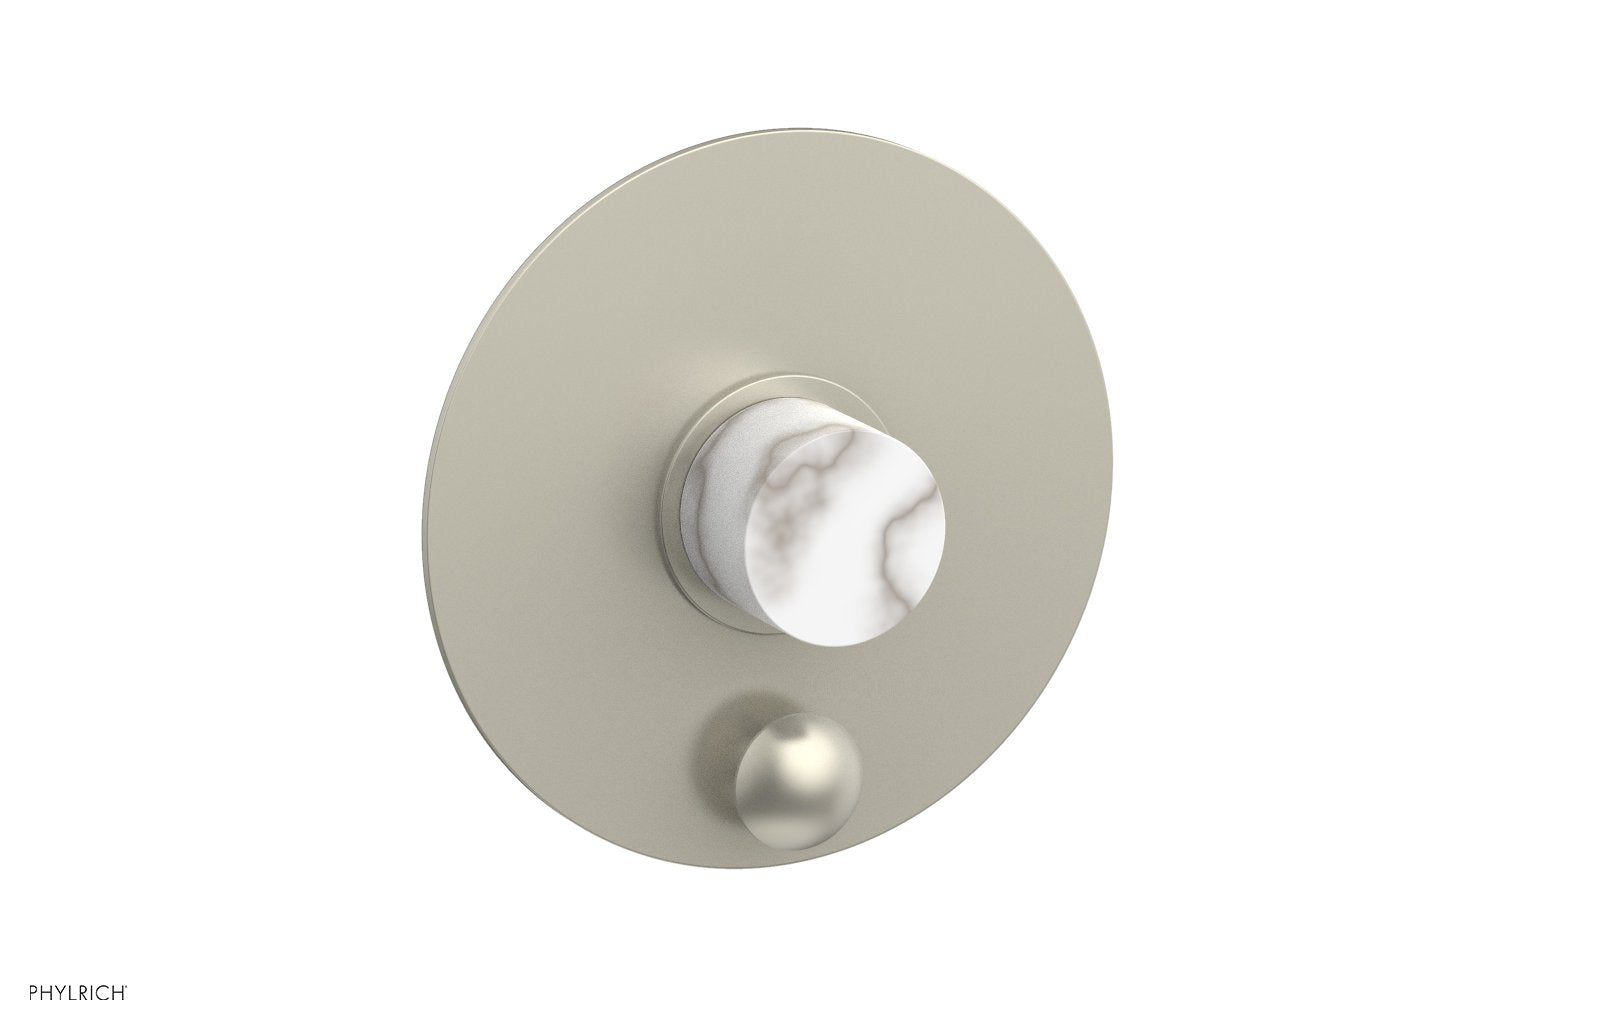 Phylrich BASIC II Pressure Balance Shower Plate with Diverter and Handle Trim Set - White Marble